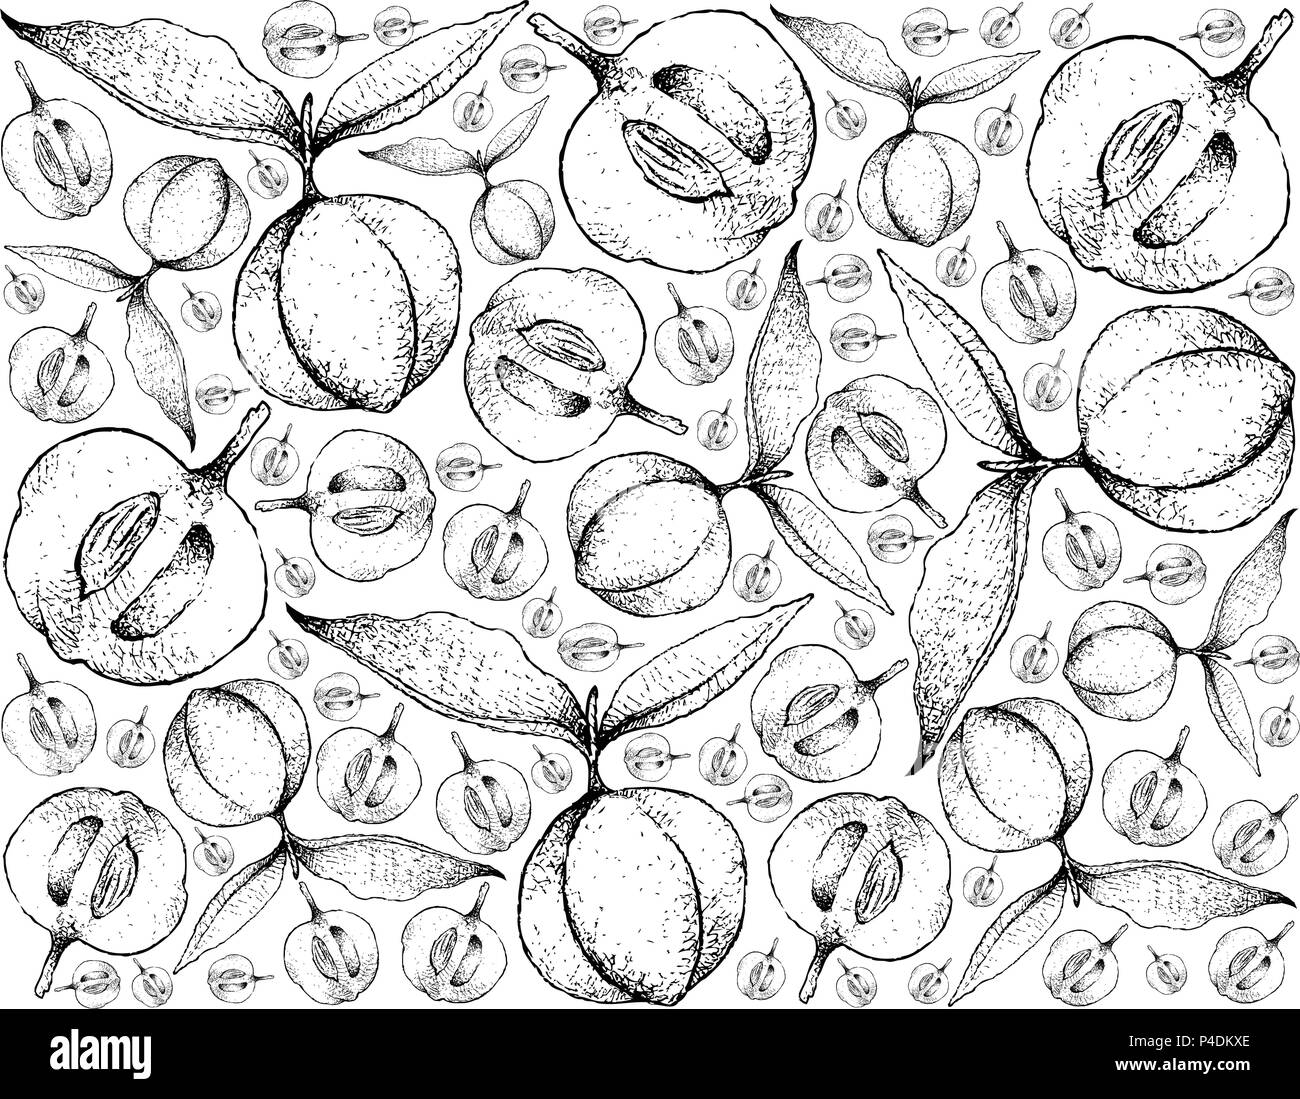 Tropical Fruit, Illustration Wallpaper of Hand Drawn Sketch Ripe and Sweet Diospyros Blancoi or Velvet Apple Fruits Isolated on White Background. Stock Vector